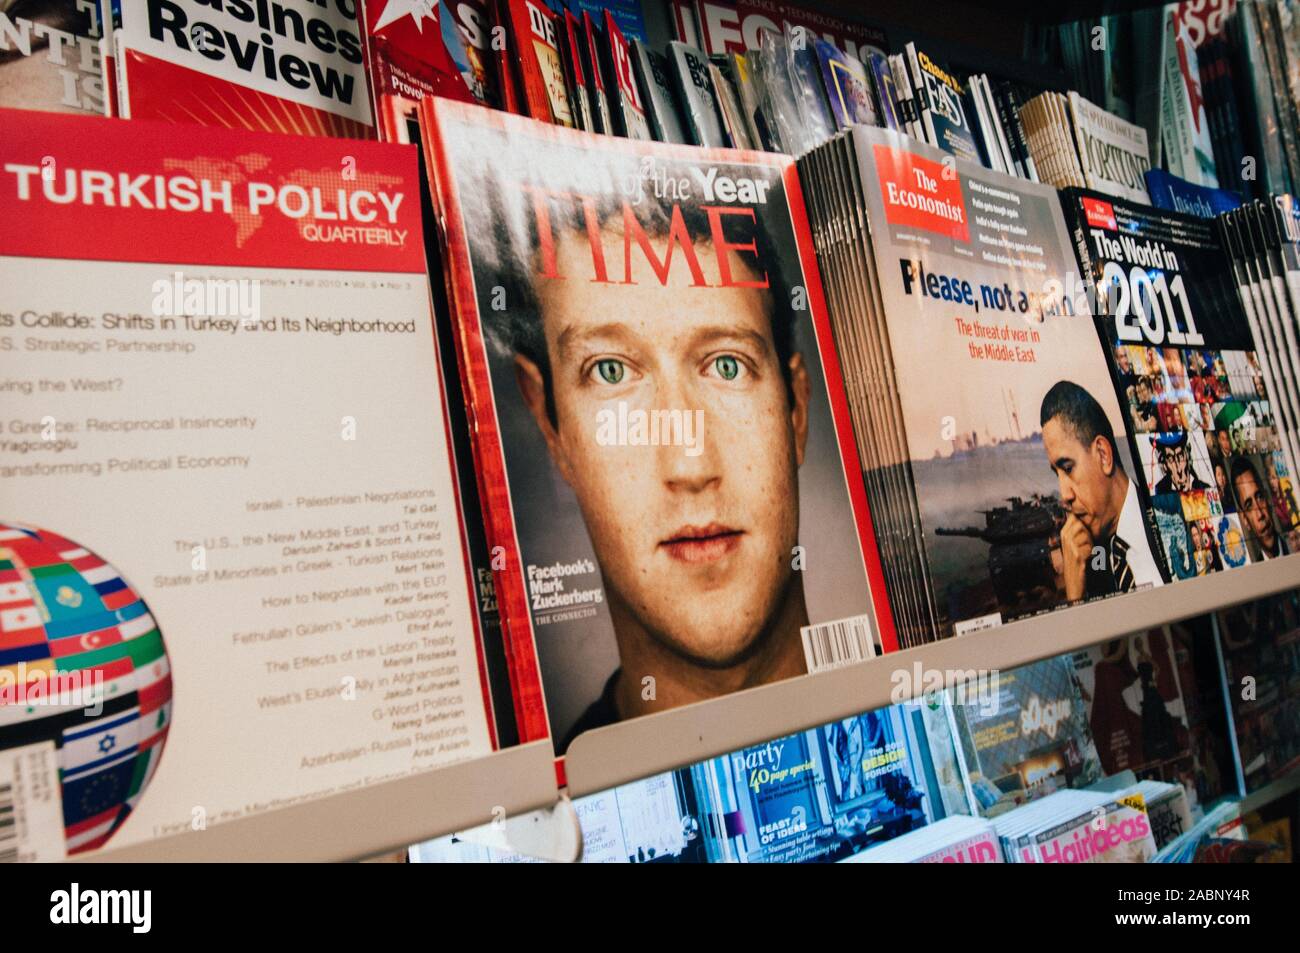 Istanbul; Turkey - May 28; 2010: The Economist; Turkish Policy and iconic cover of Time magazine with Mark Zuckerber - Person of the year 2010 Stock Photo